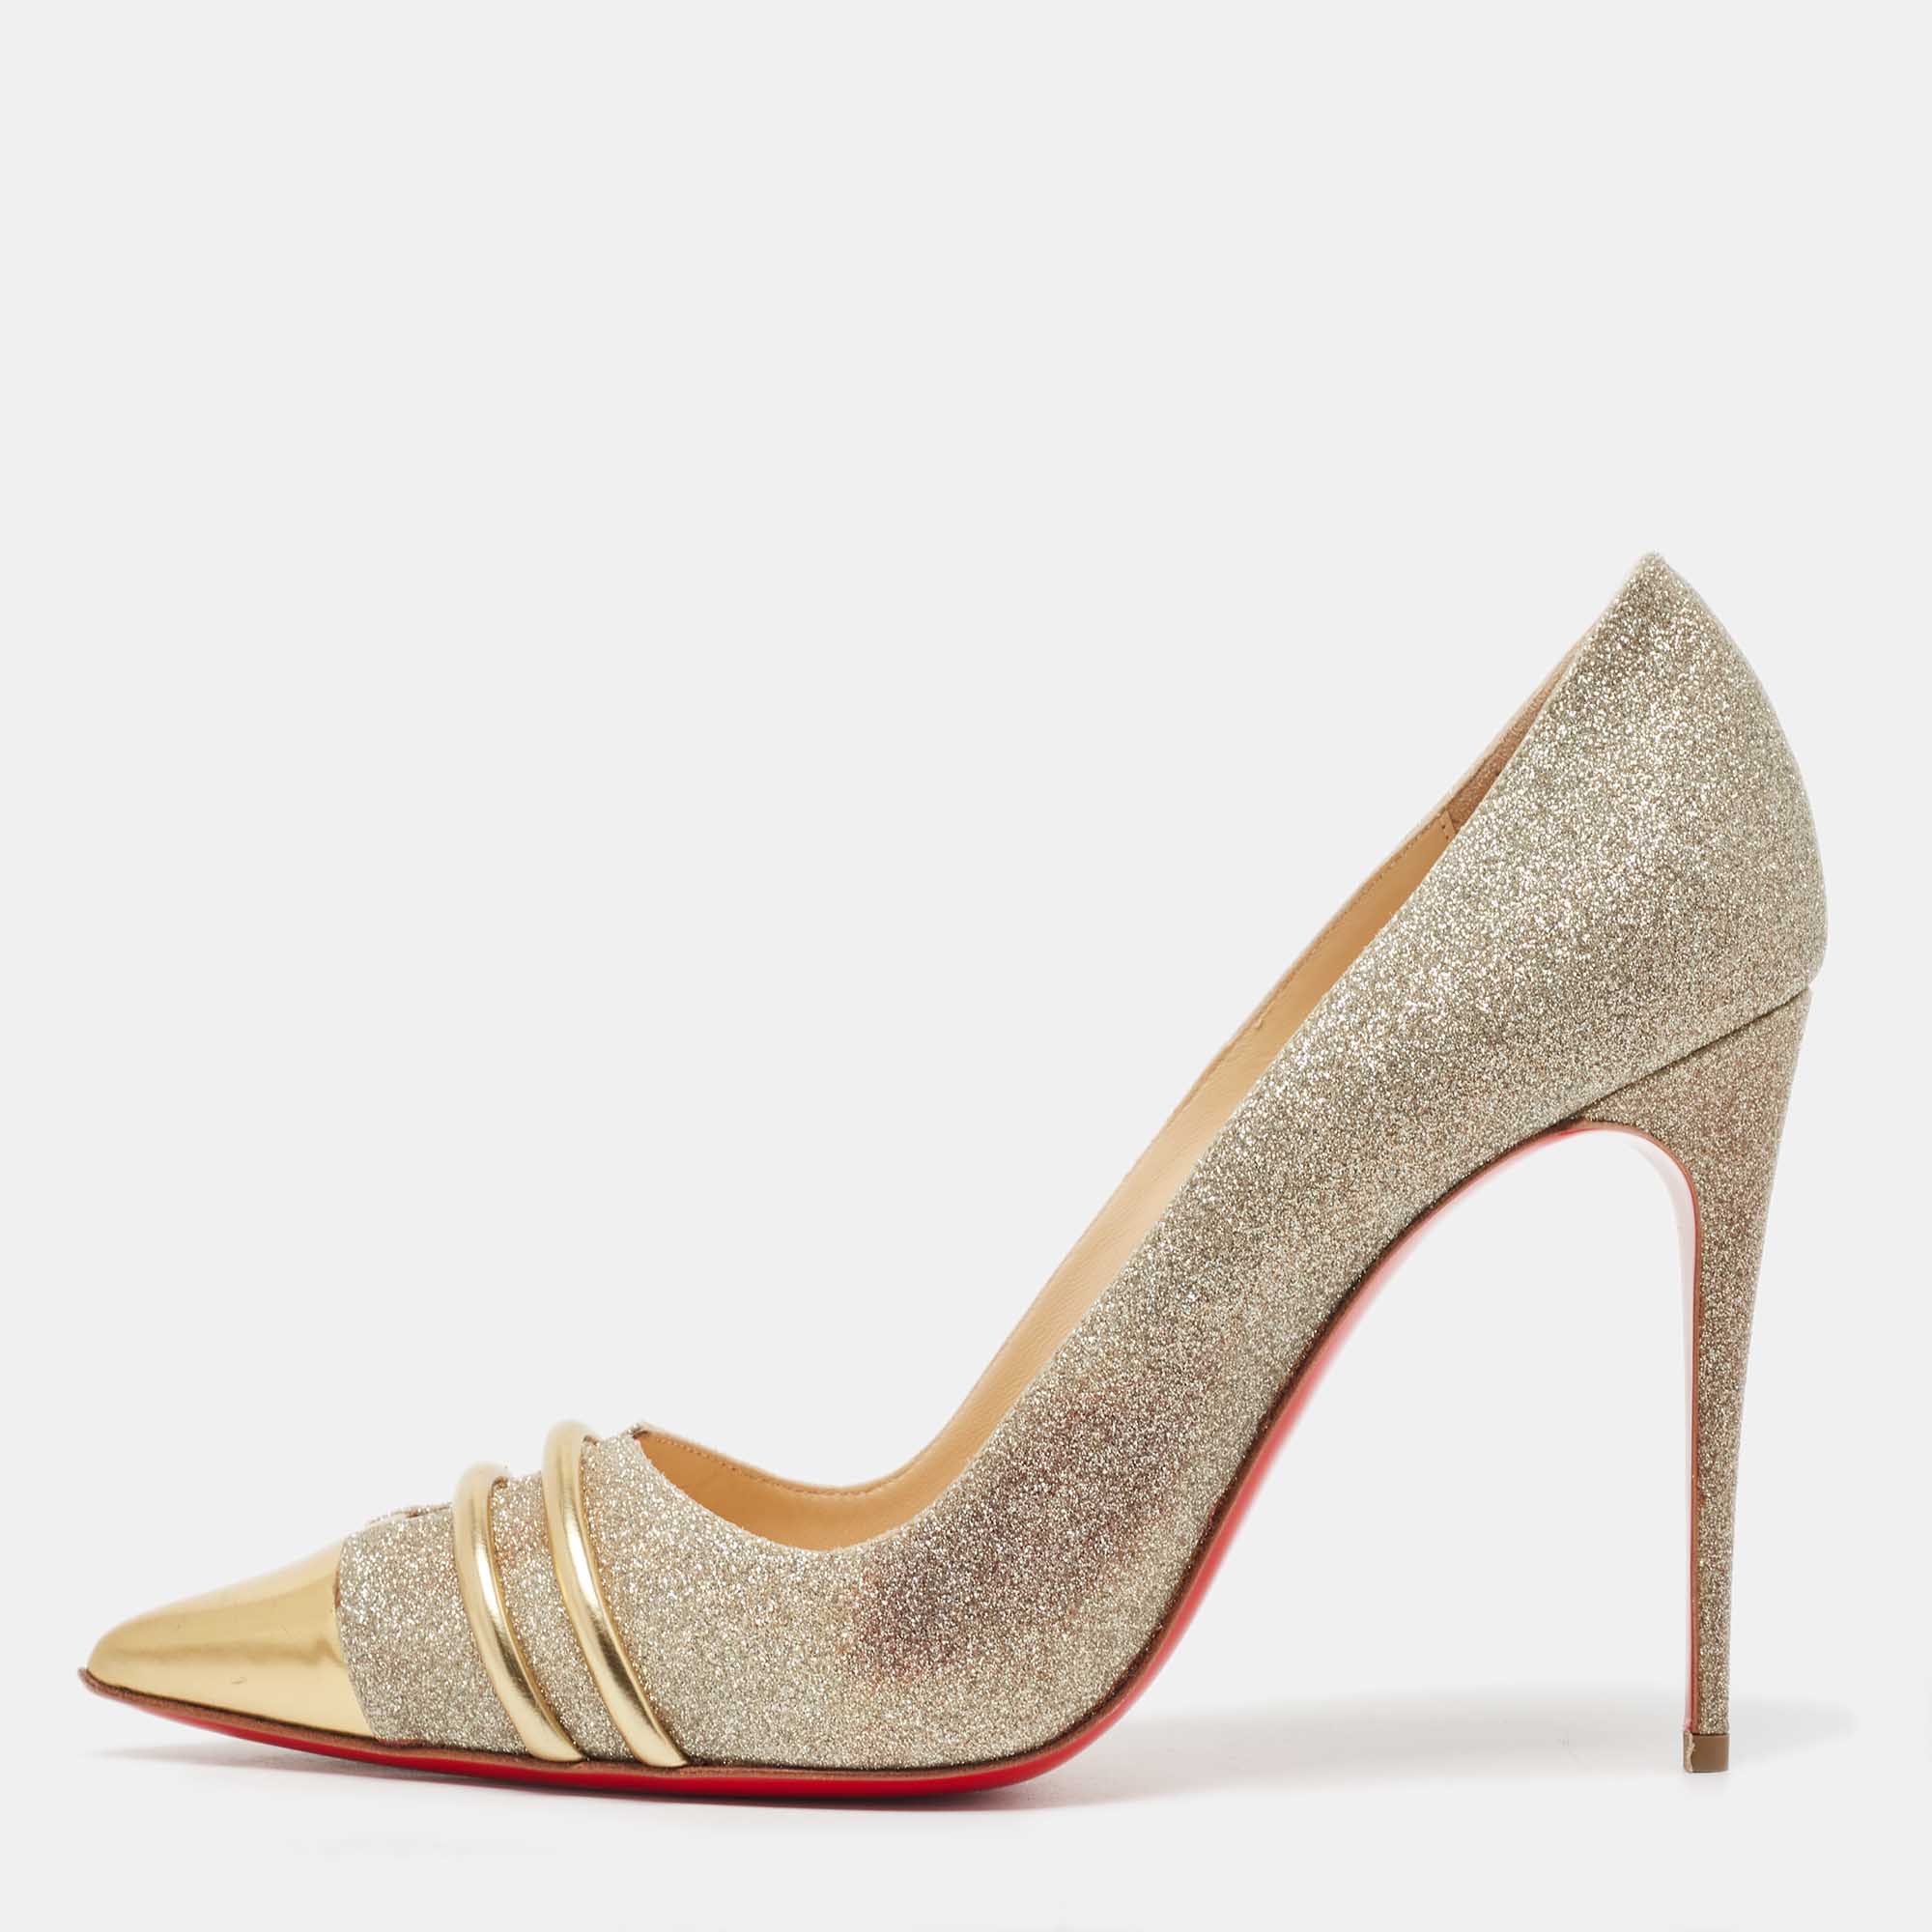 Christian Louboutin Gold Glitter And Leather Front Double Pumps Size 39.5